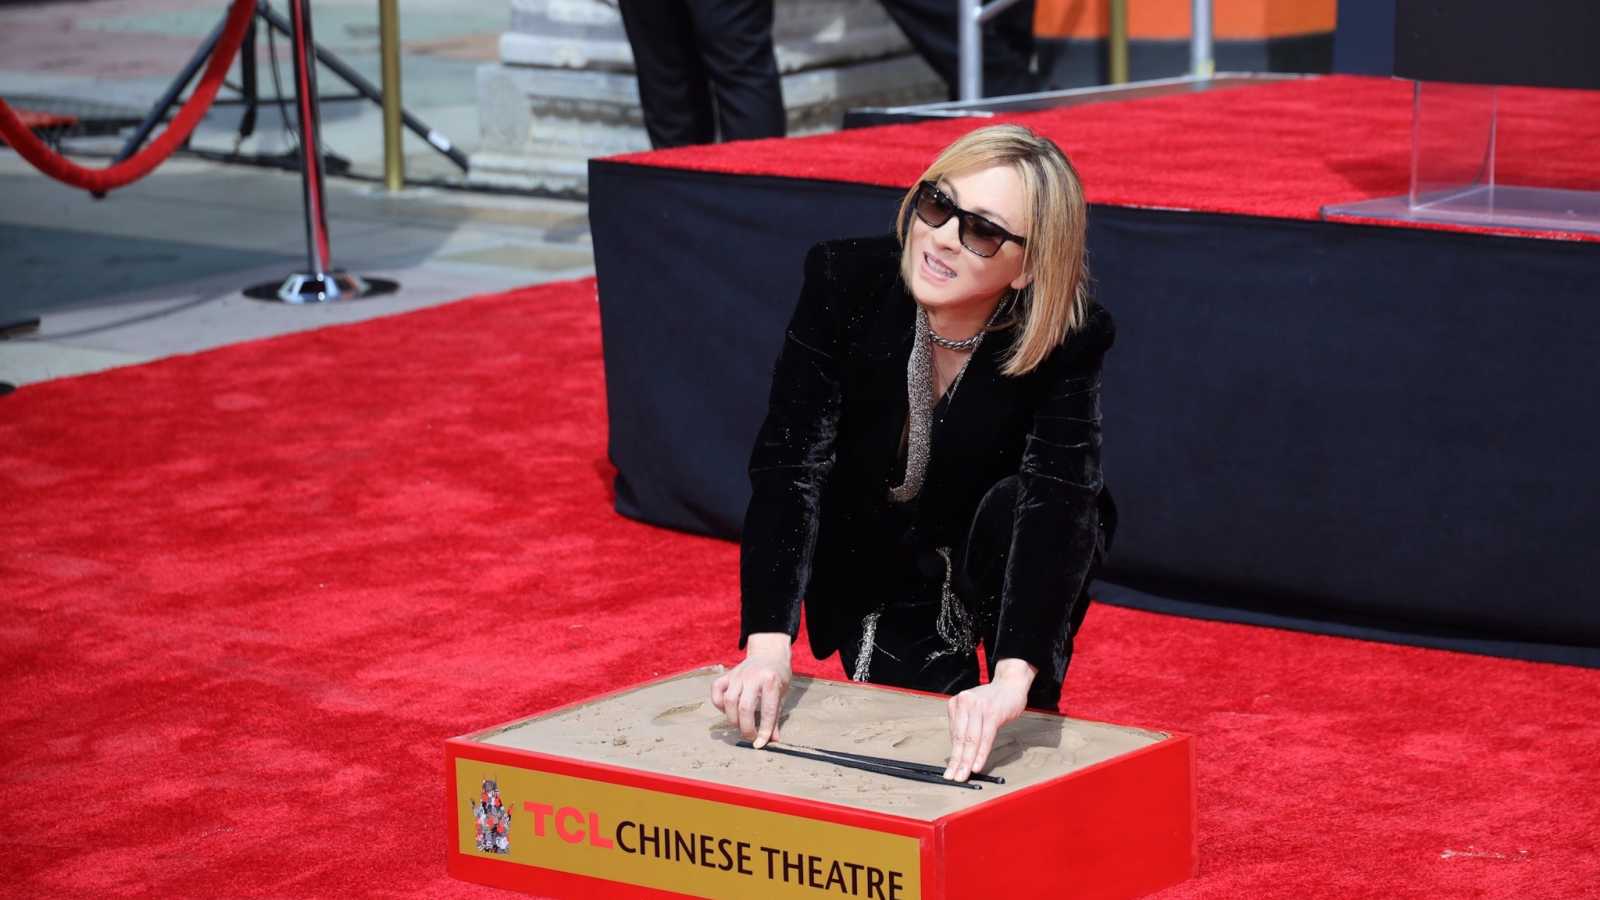 TCL Chinese Theatre Announces Special Ceremony to Unveil YOSHIKI's Handprints and Footprints © YOSHIKI. All rights reserved.